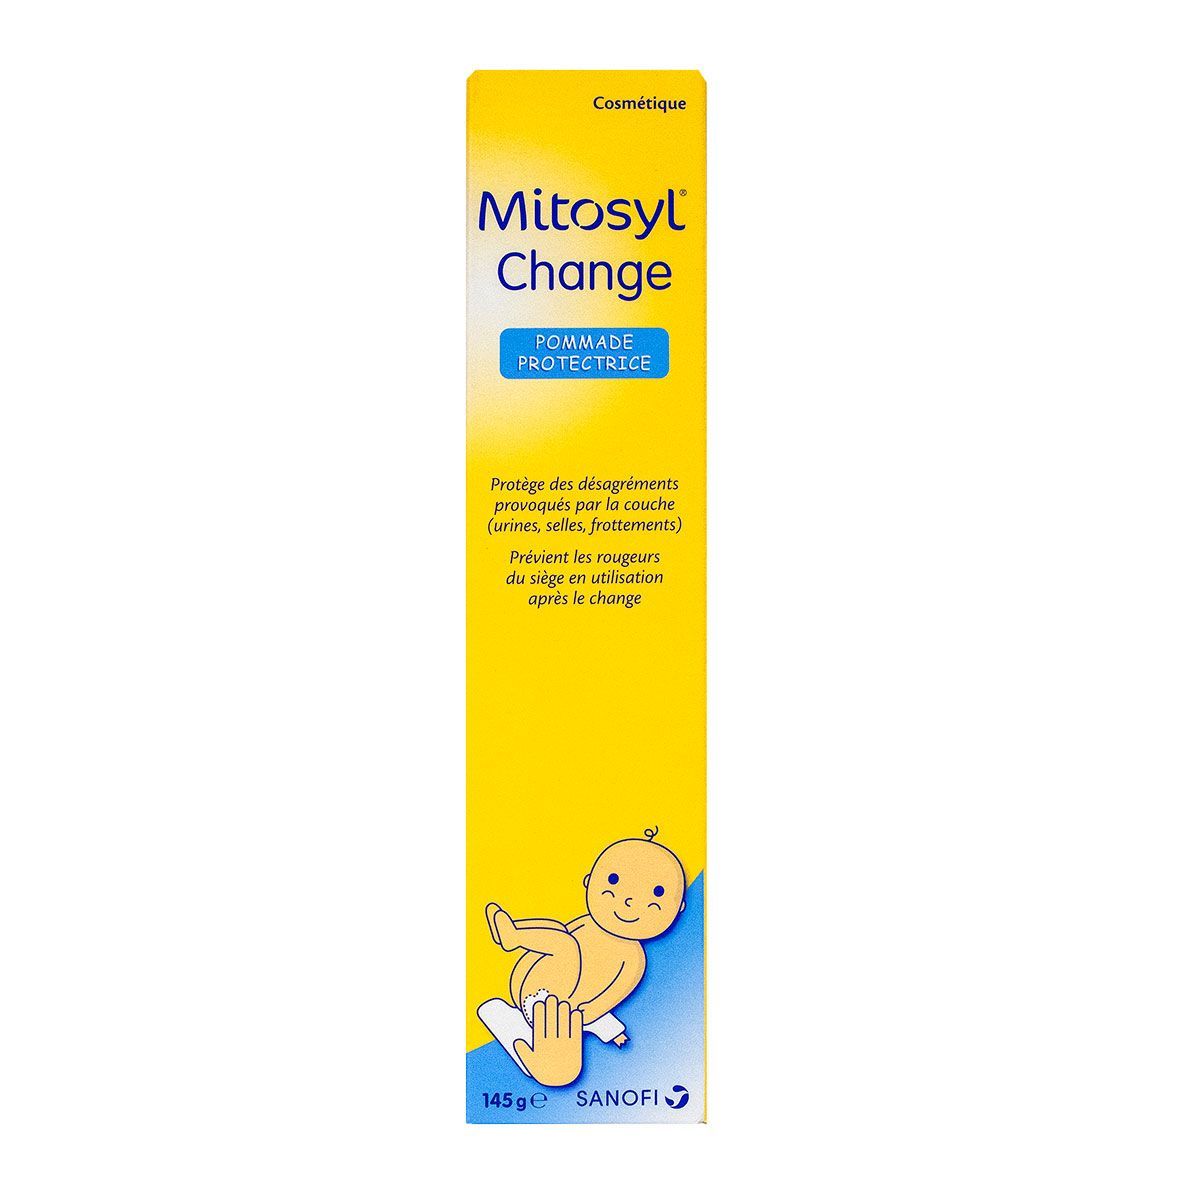 MITOSYL Change Pommade Protectrice - Fabellashop